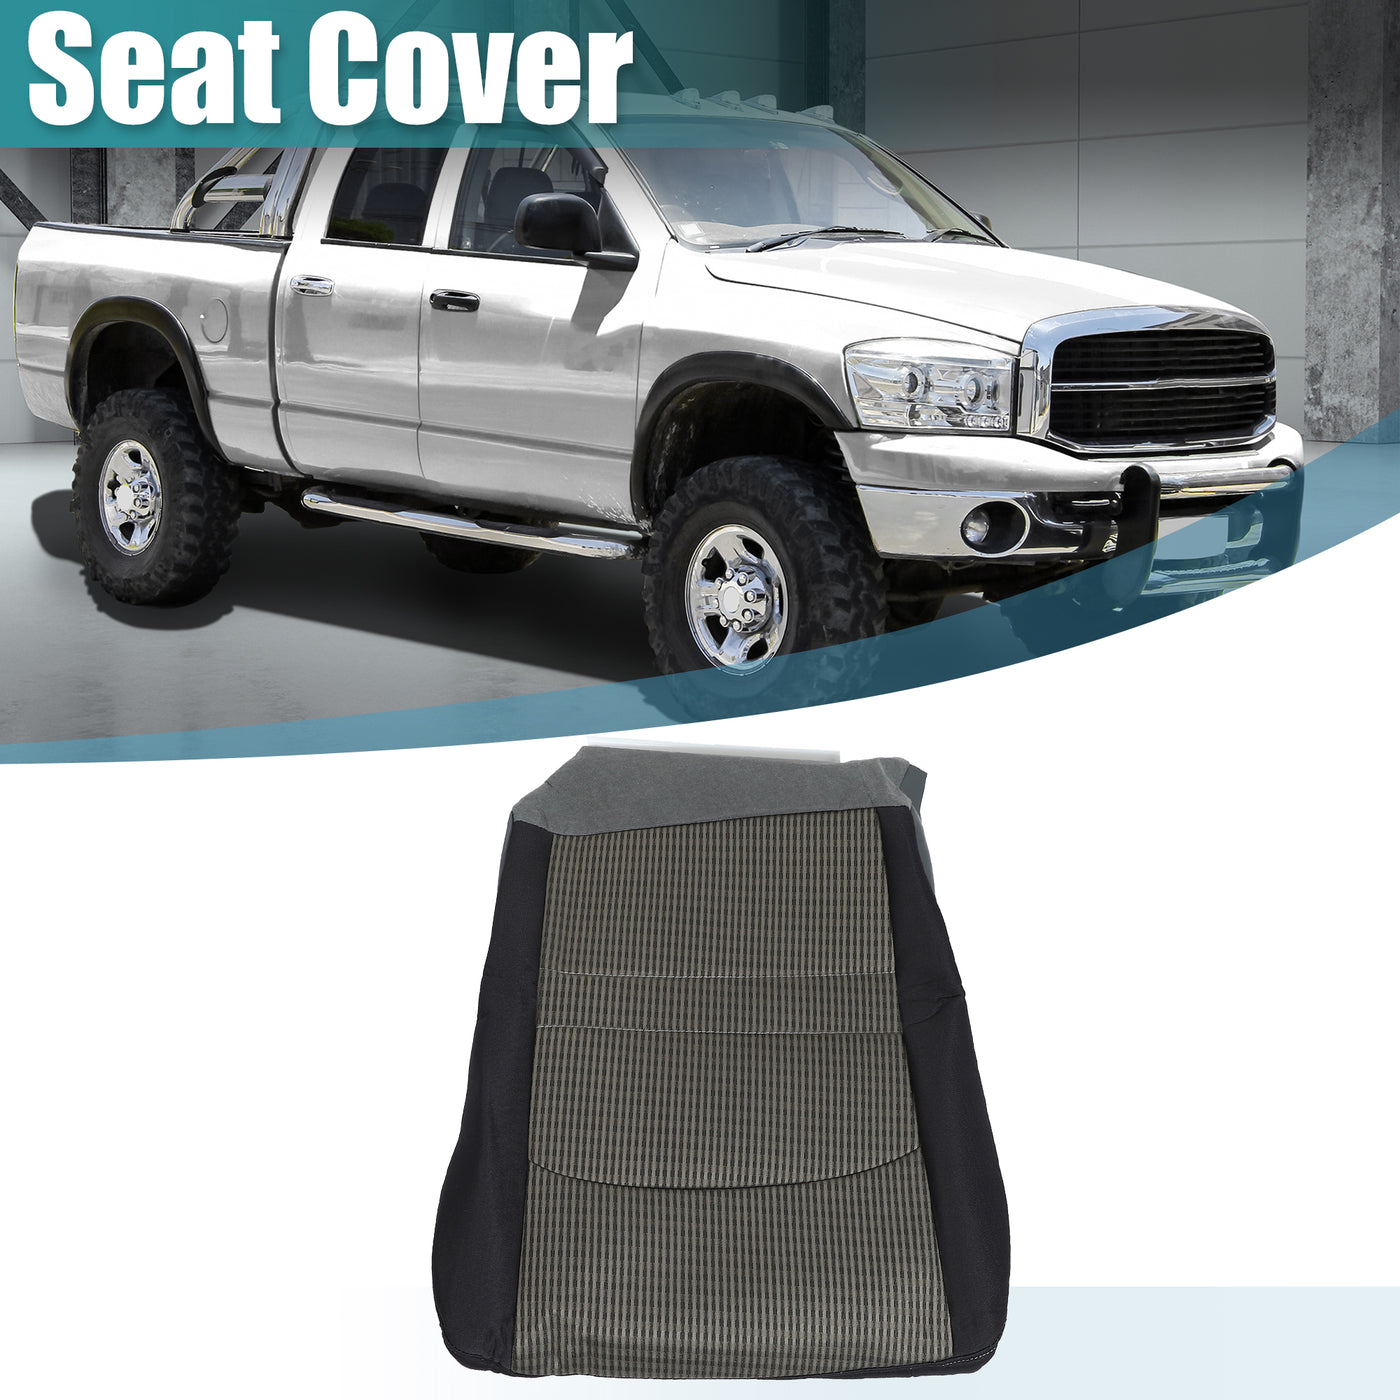 X AUTOHAUX Black Driver Side Bottom Cloth Seat Cover for Dodge for Ram 1500 2500 3500 4500 5500 SLT 2010-2012 Driver Seat Cushion